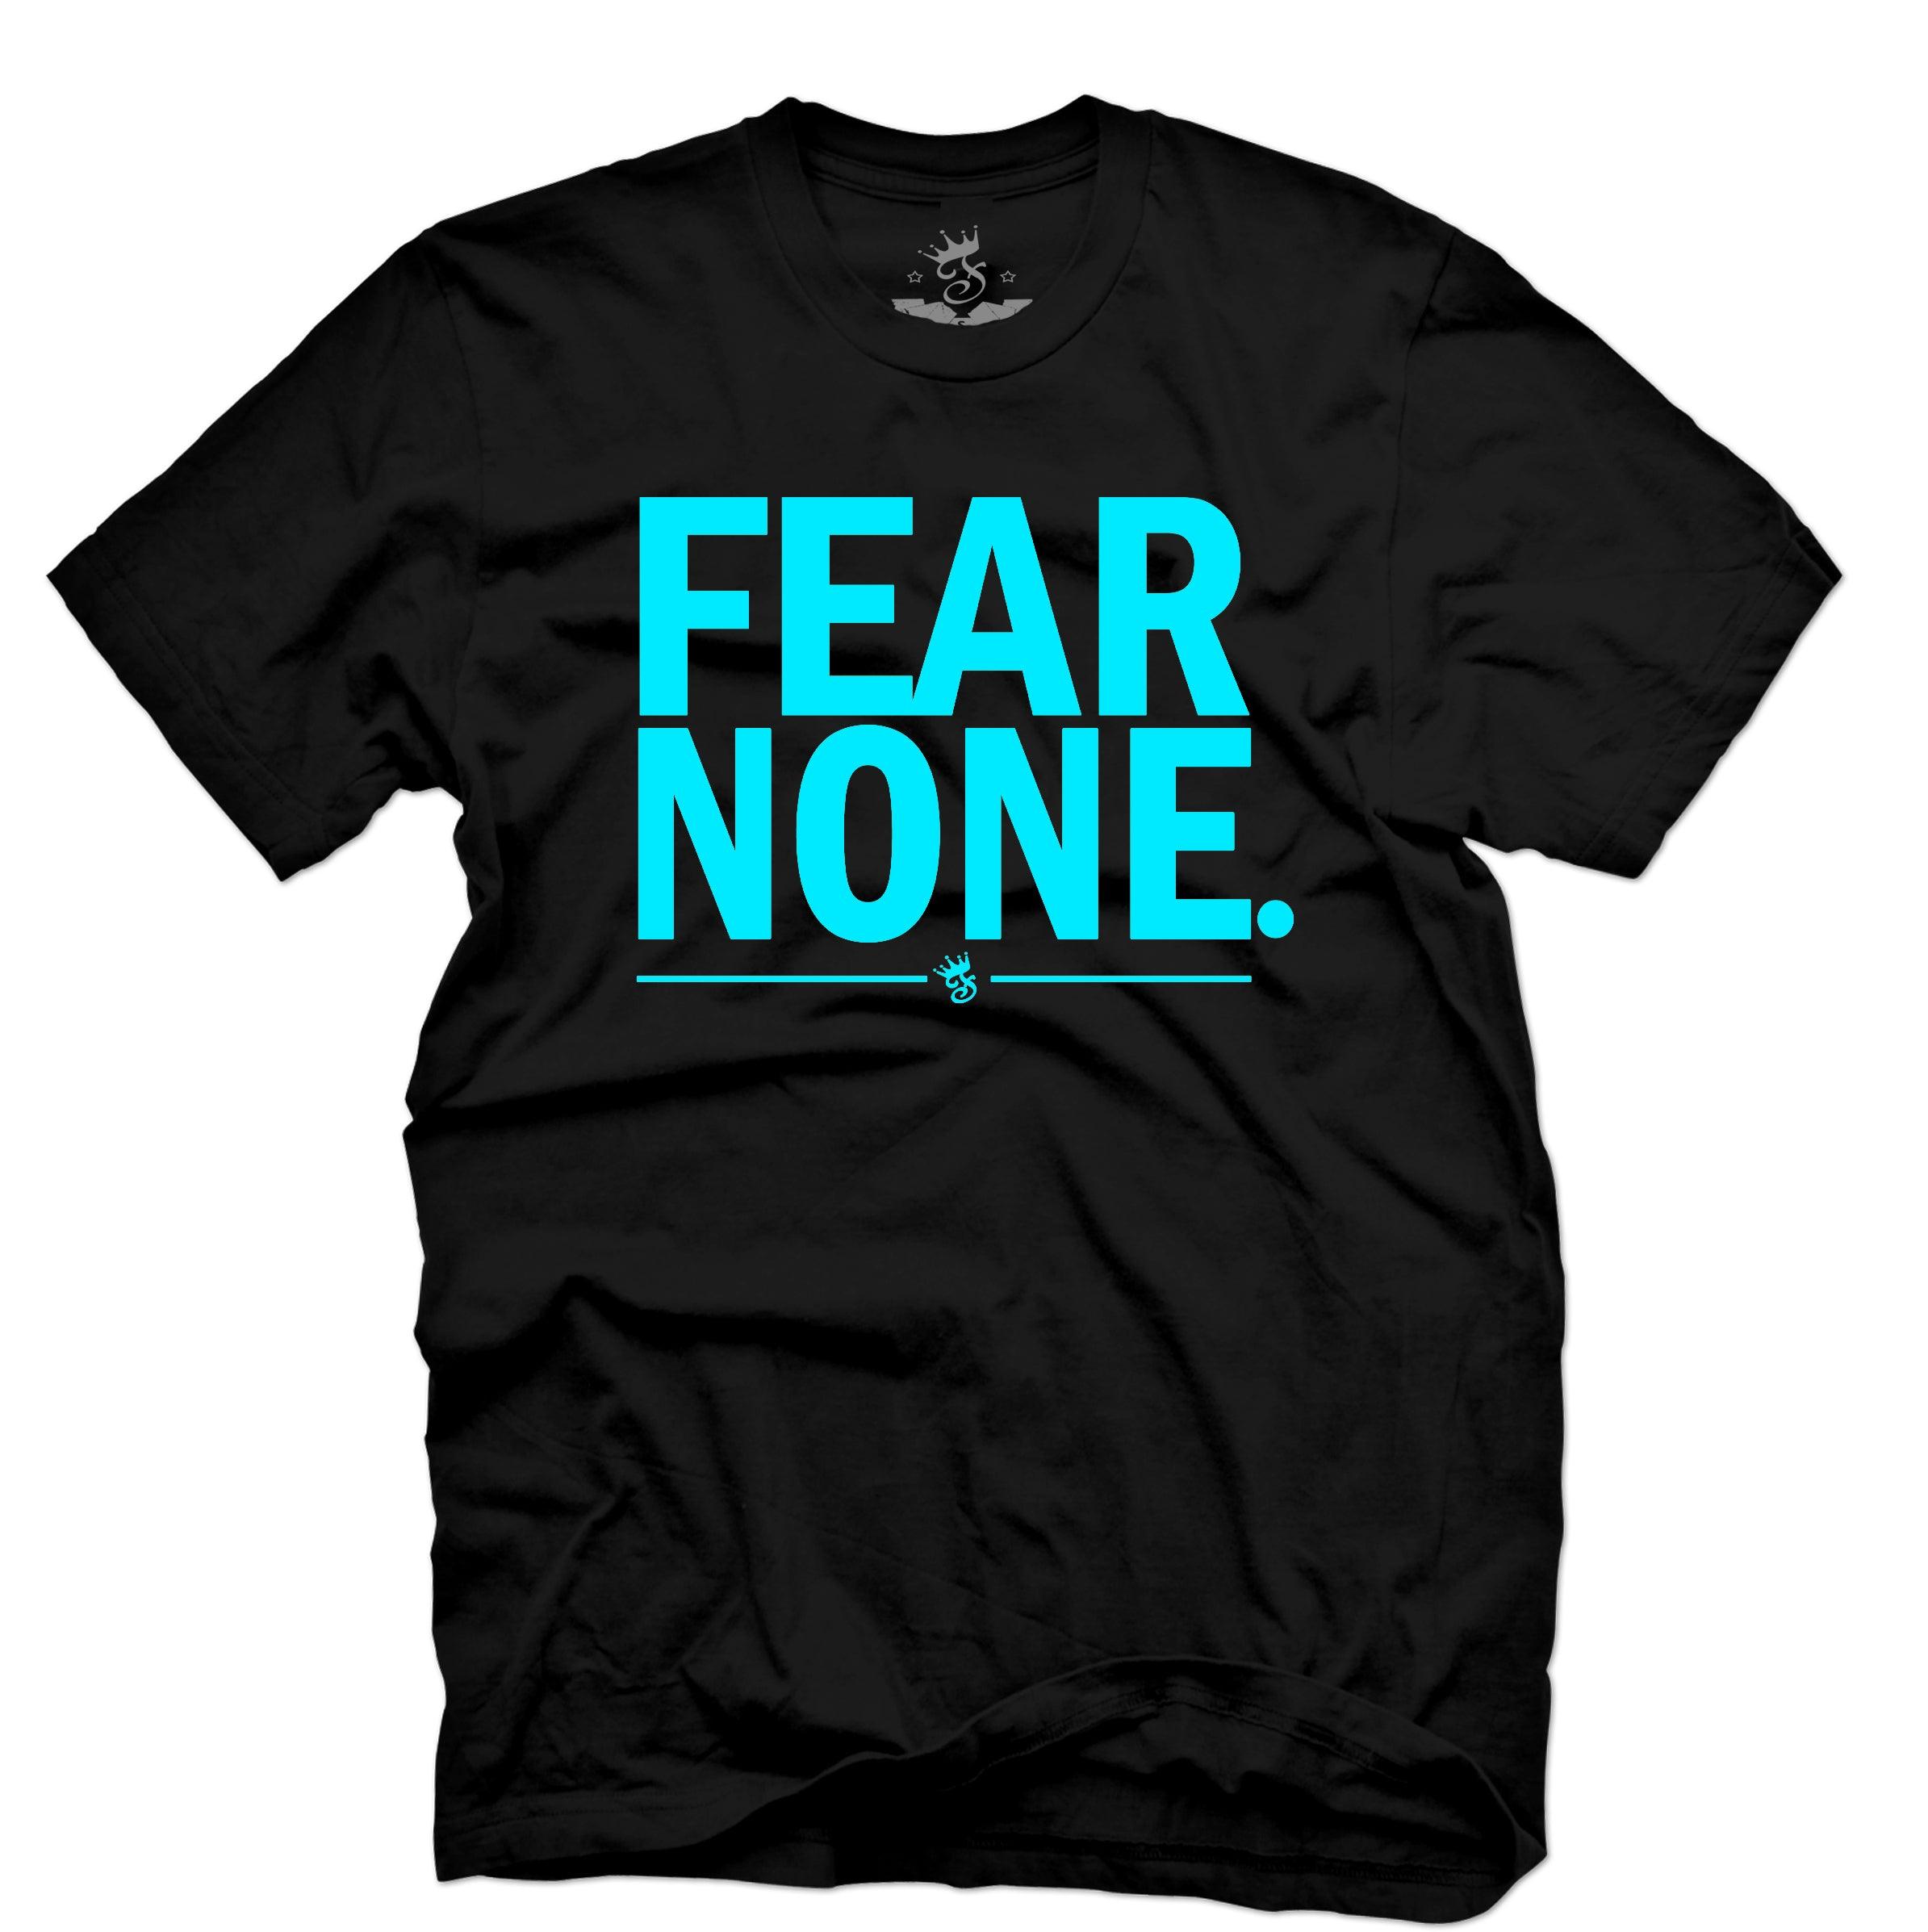 FEAR NONE - Famous Club Clothing